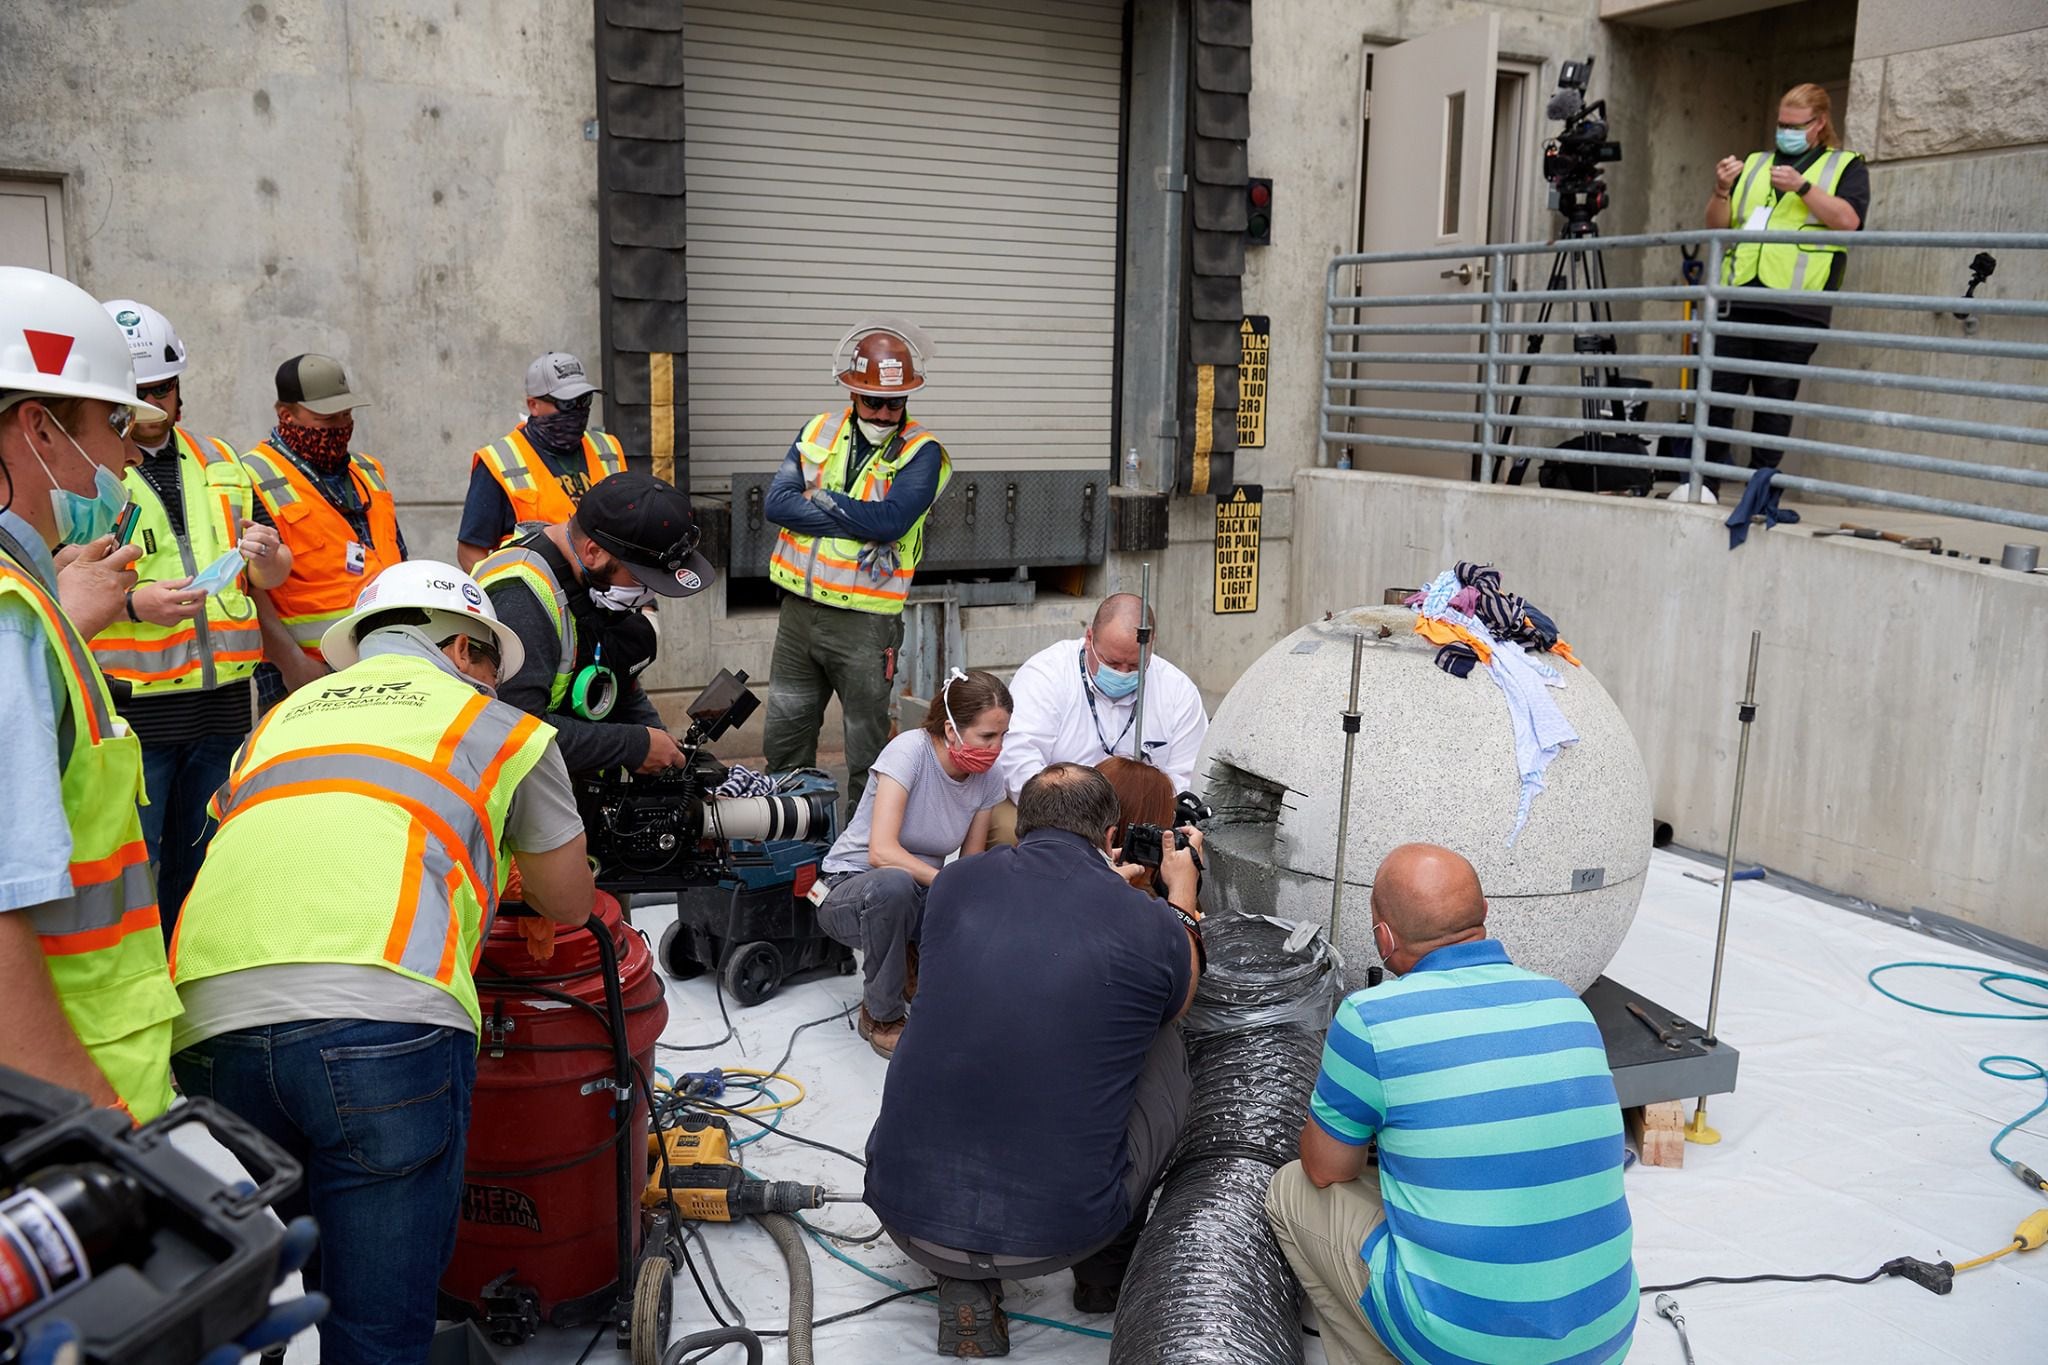 (photo courtesy The Church of Jesus Christ of Latter-day Saints) Preservation specialists begin the process of cutting into and retrieving items from the time capsule within the capstone of the Salt Lake Temple on May 18, 2020, at the Church History Library.